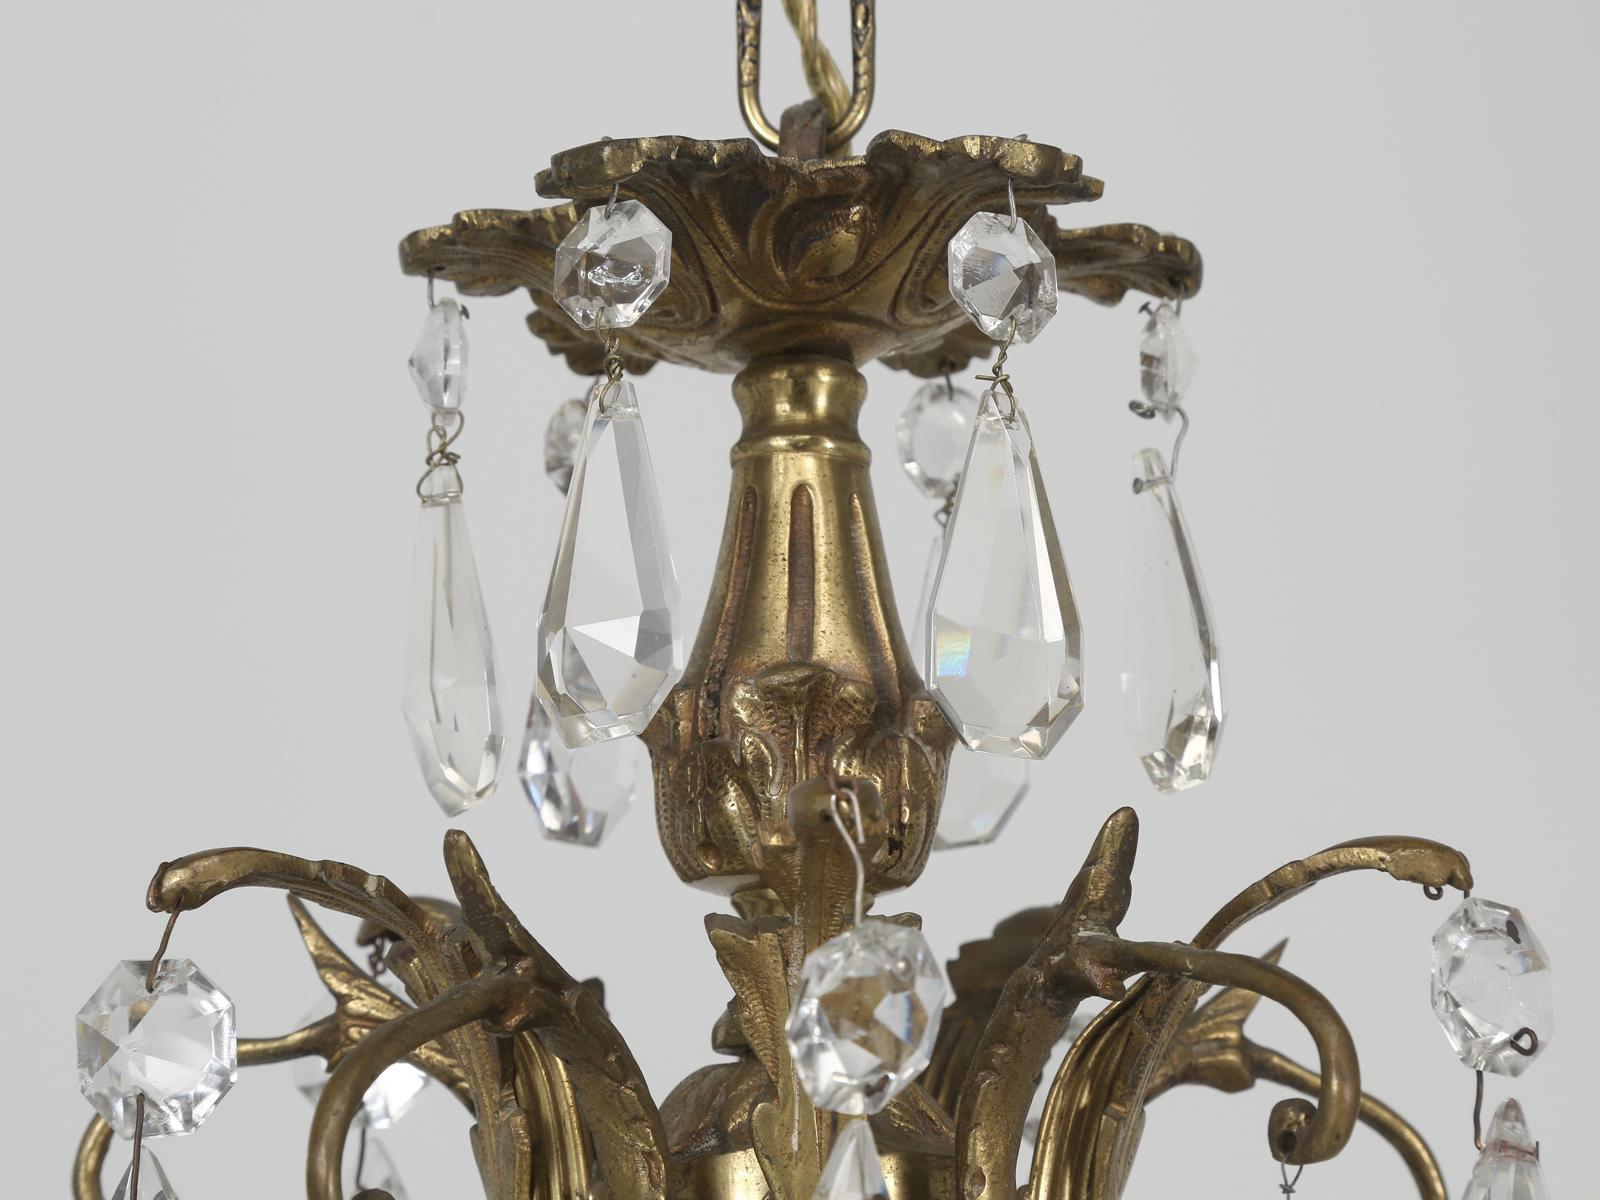 An almost antique chandelier for we believe it is probably only 80-90-years old. Had we priced this crystal and bronze chandelier by the pound we could have doubled our asking price. Very heavy bronze frame that appears to have been gilded and the